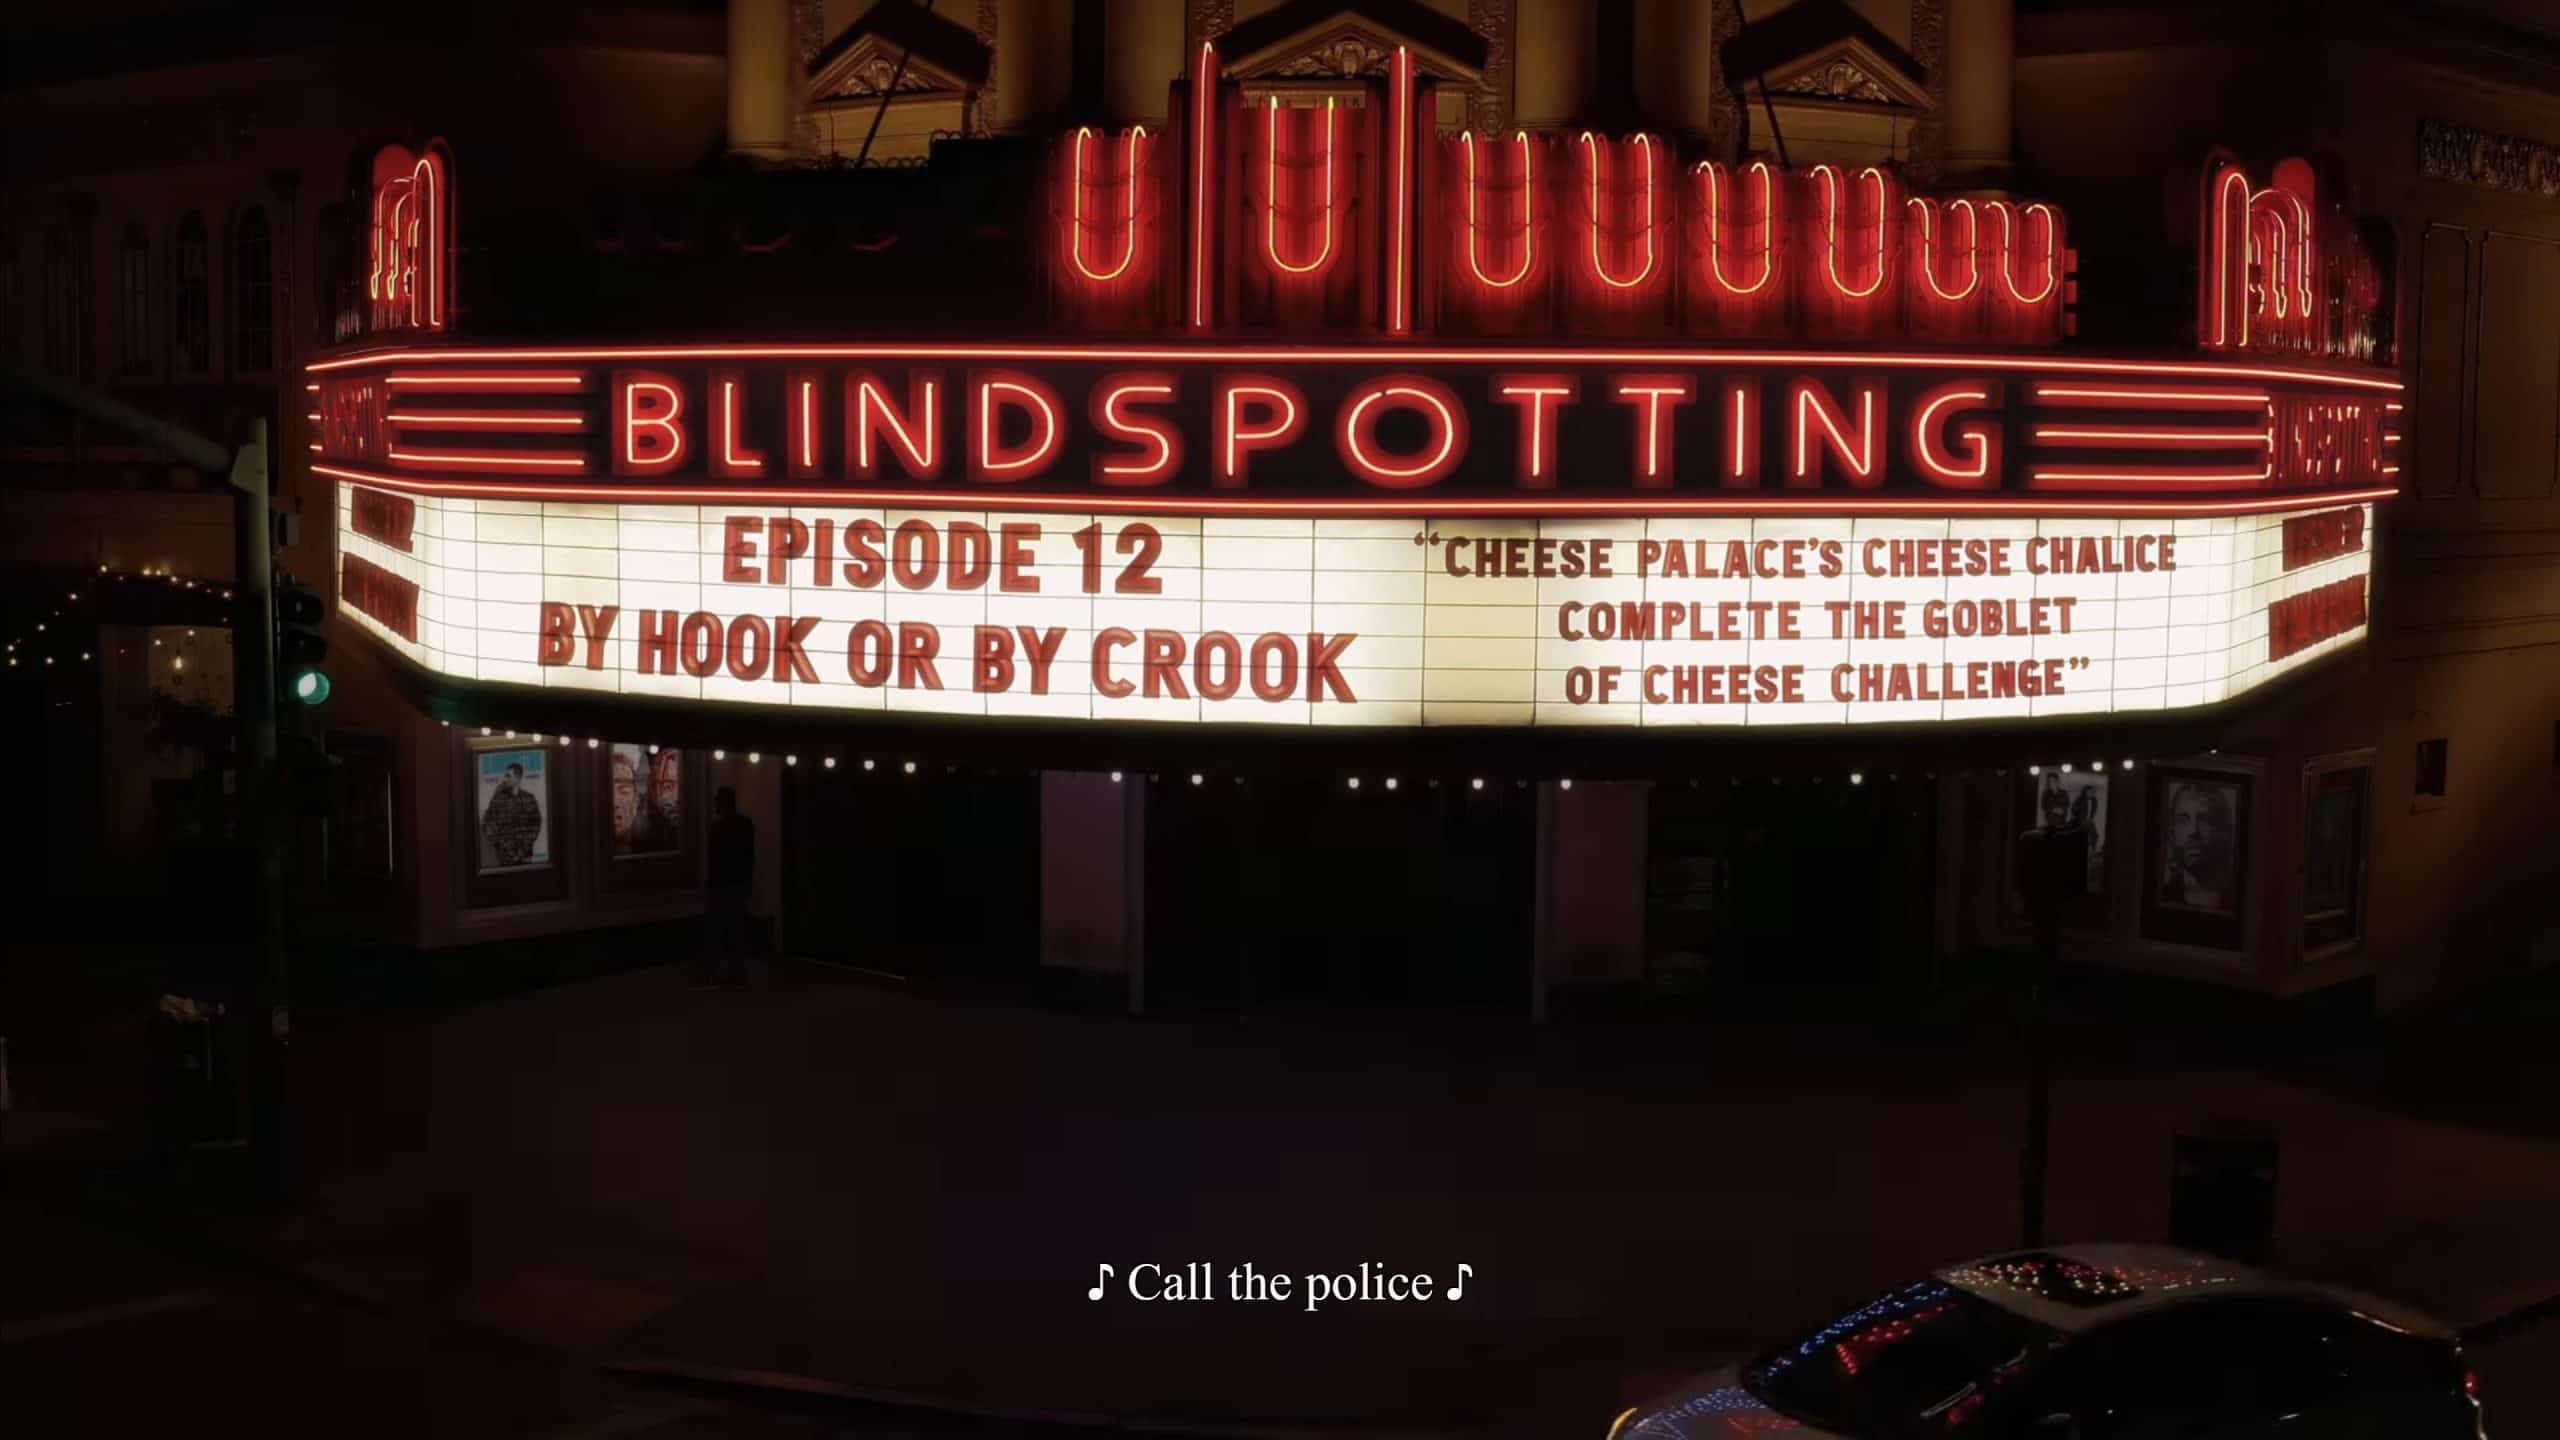 "Title Card," Blindspotting, "By Hook Or By Crook,"